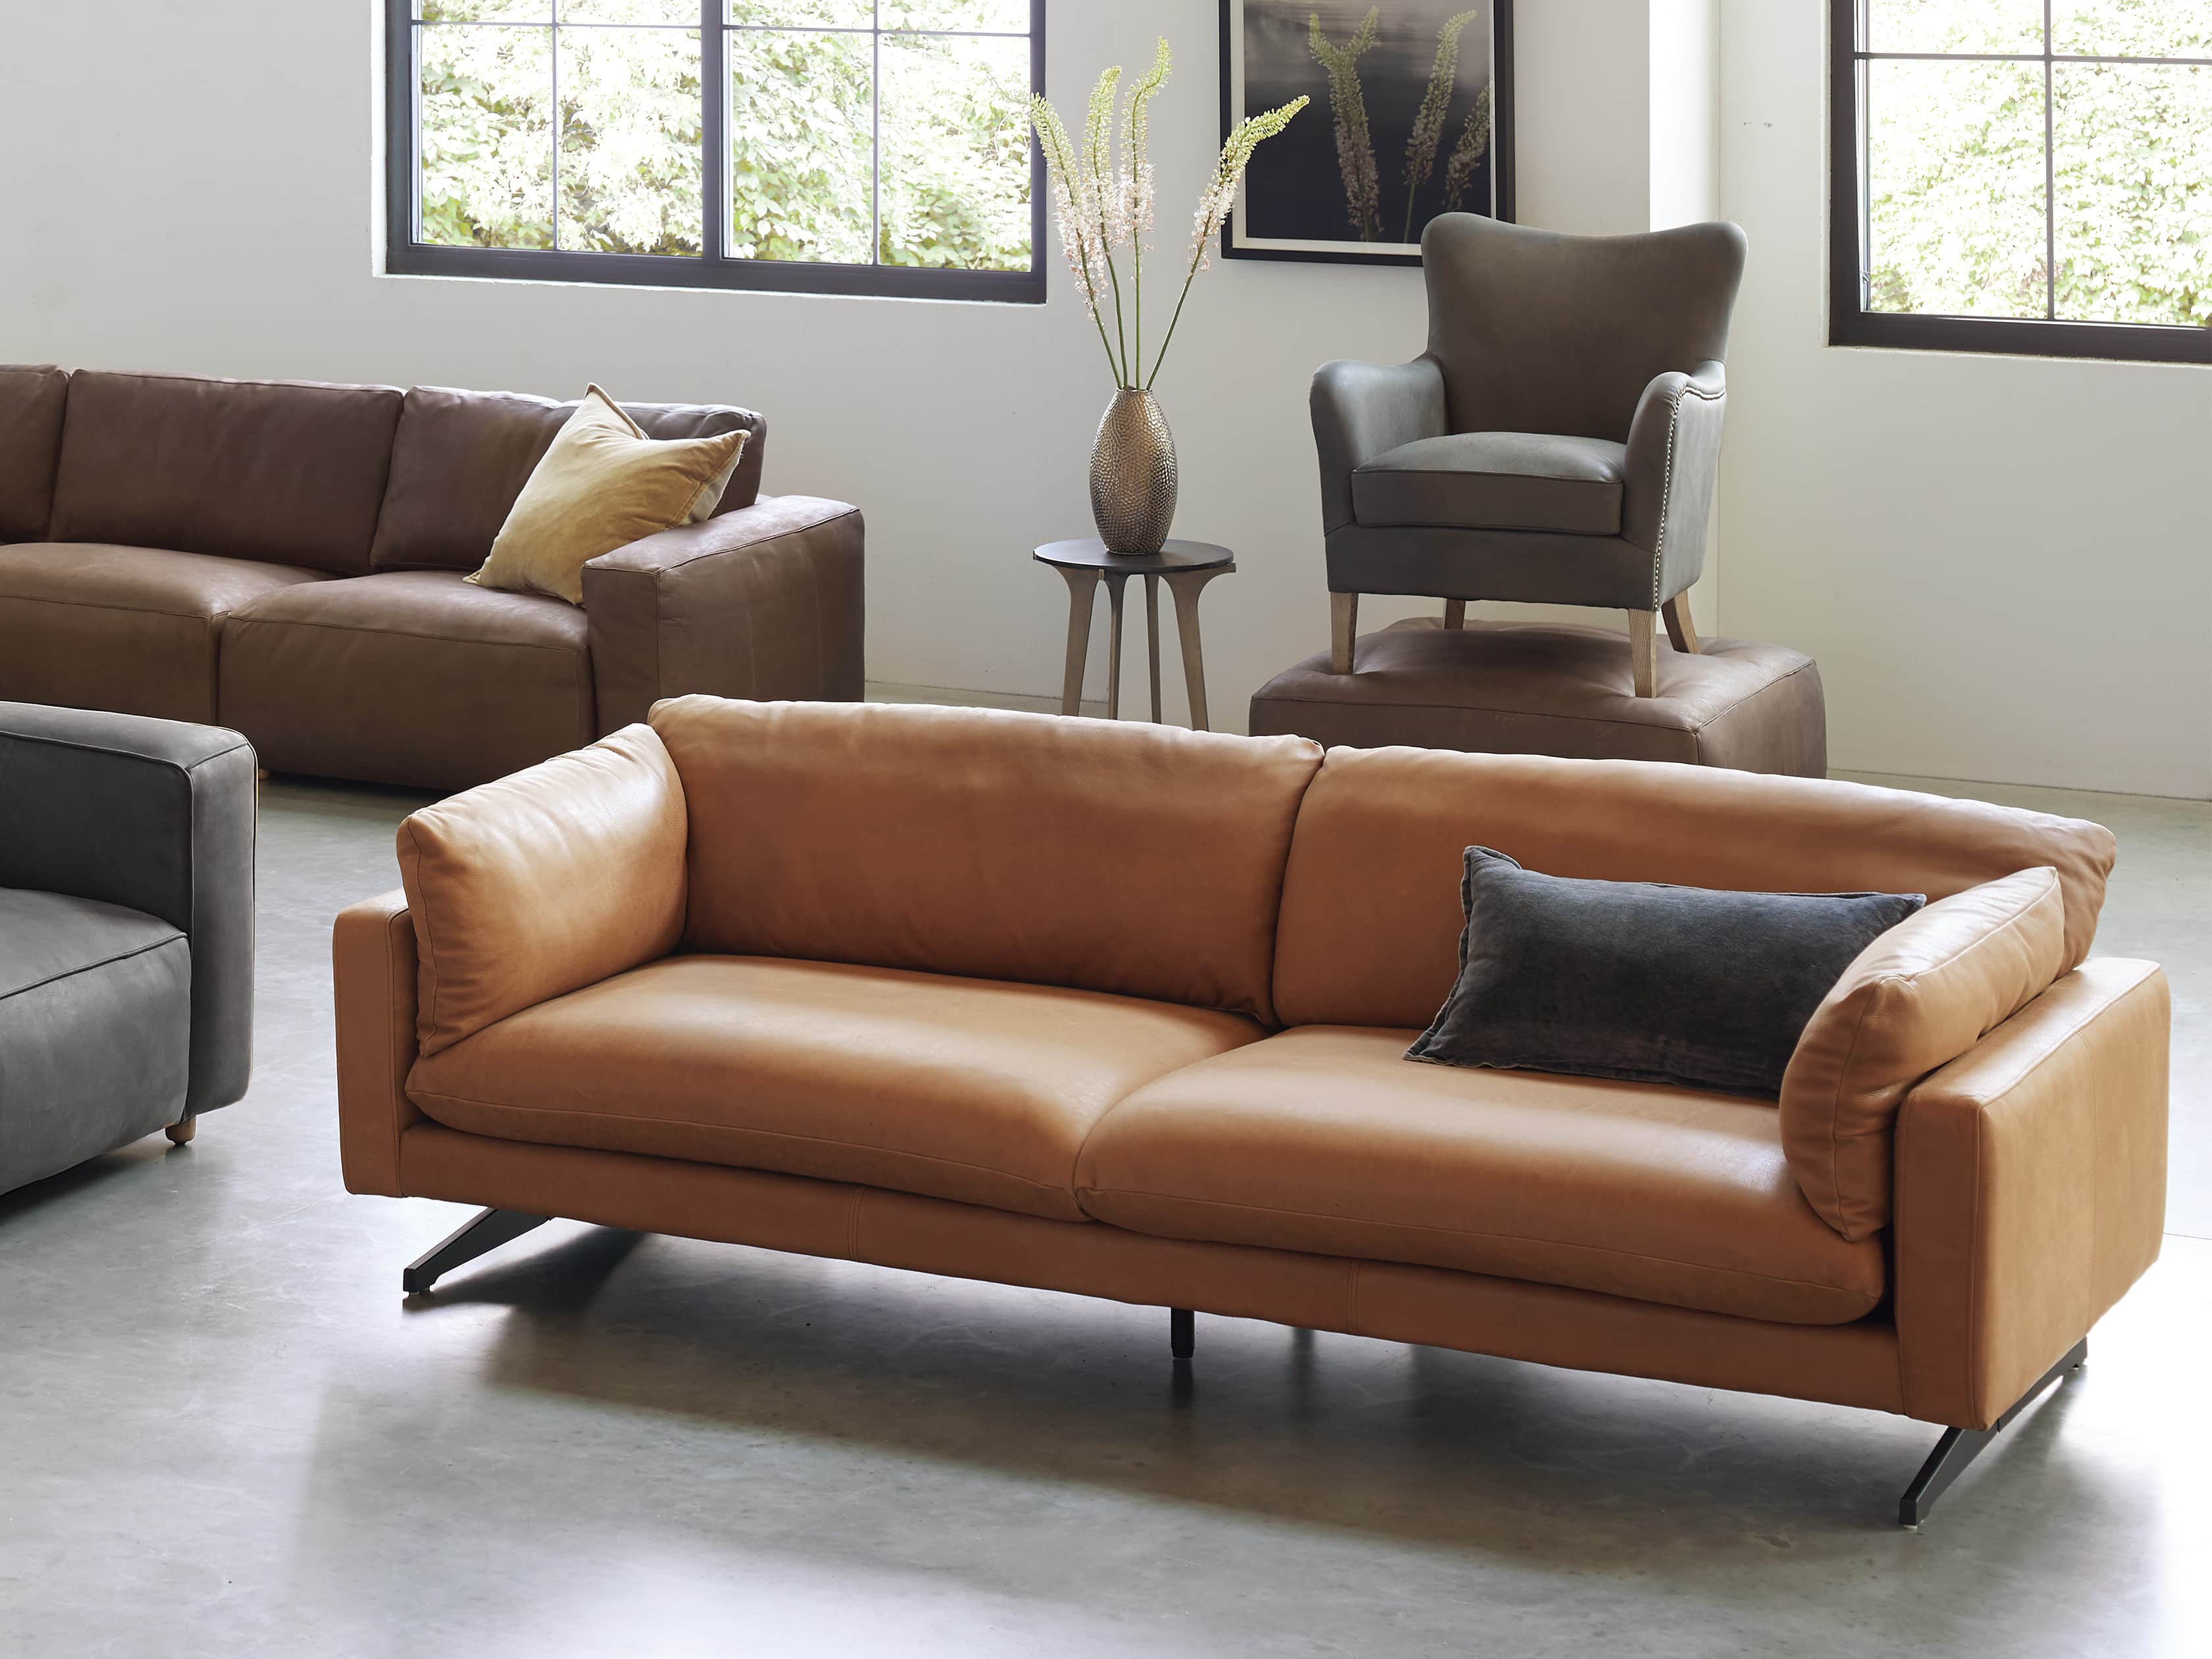 Jarvis Leather Sofa Arhaus, Discontinued Leather Sofas